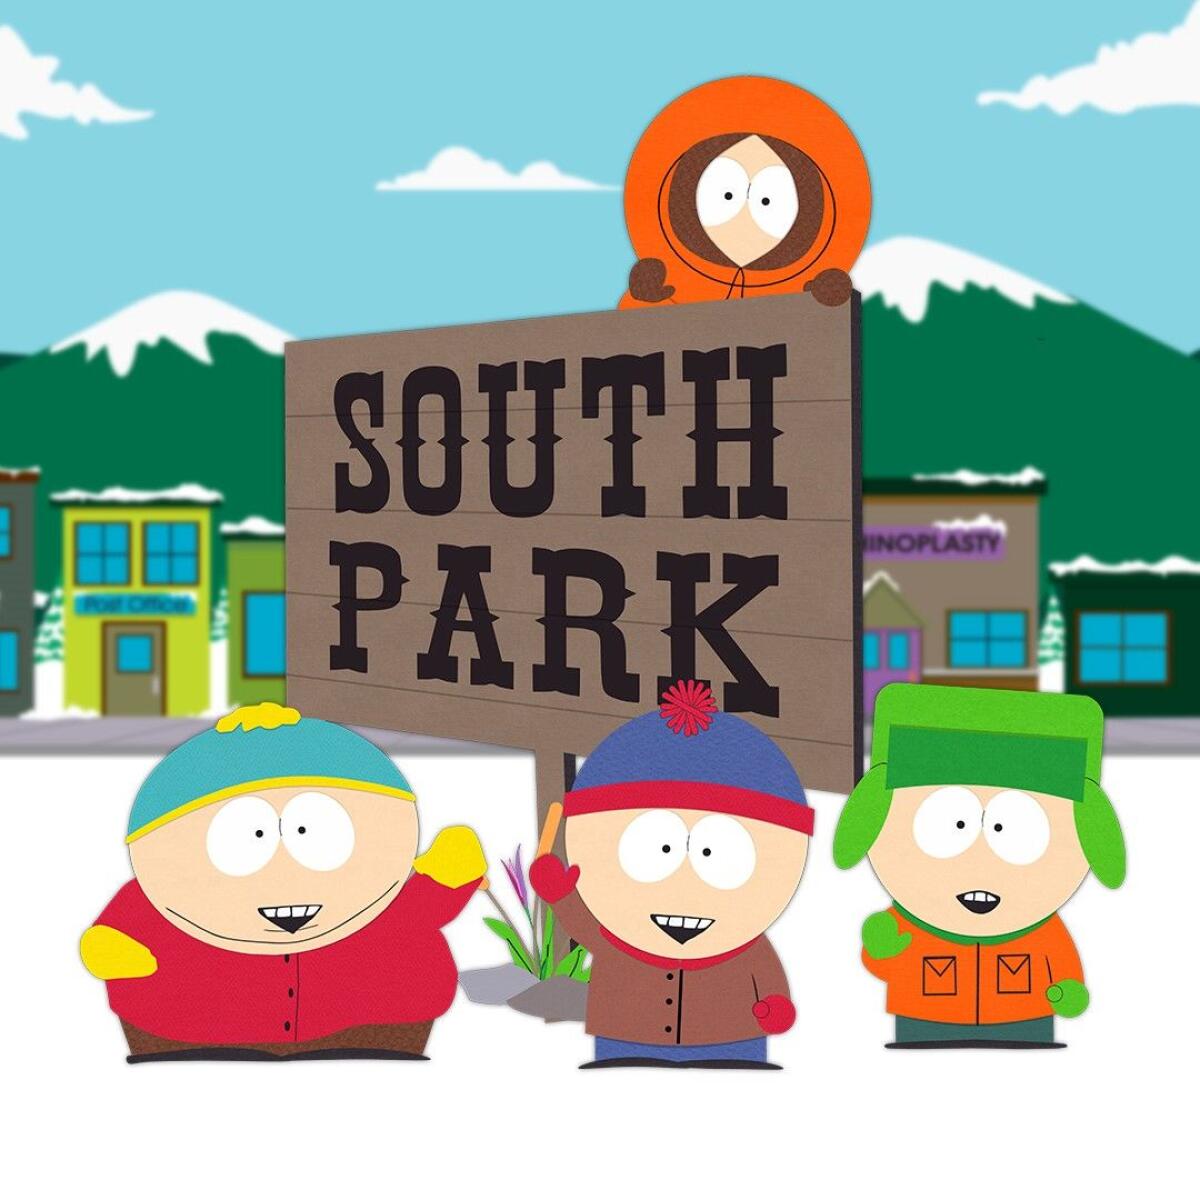 four cartoon characters stand beside a sign that reads "South Park"